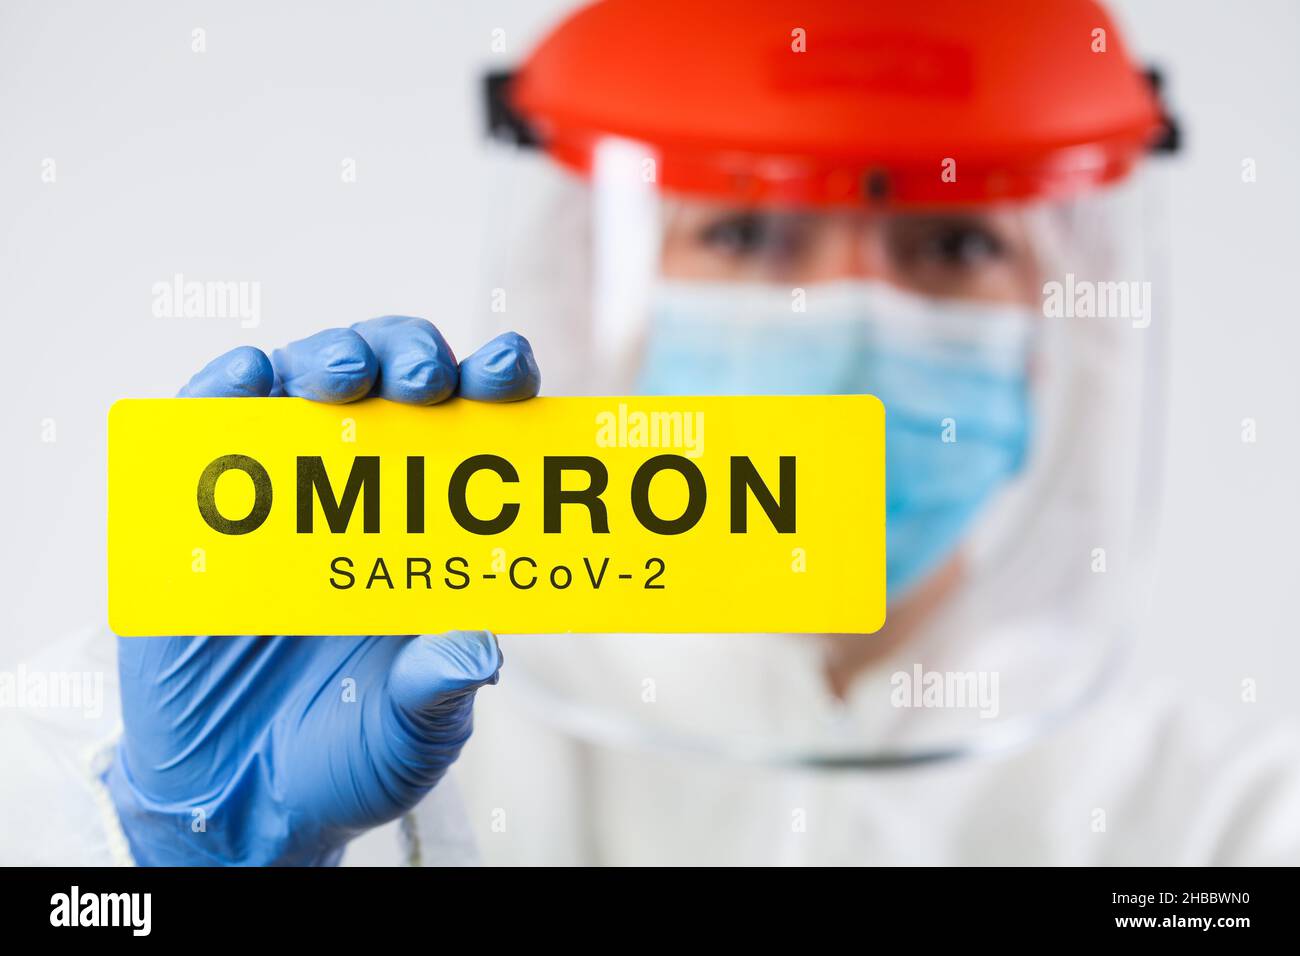 Genetic mutation of Coronavirus causing new COVID-19 cases,medical worker wearing PPE and face shield holding yellow board SARS-CoV-2 OMICRON sign Stock Photo